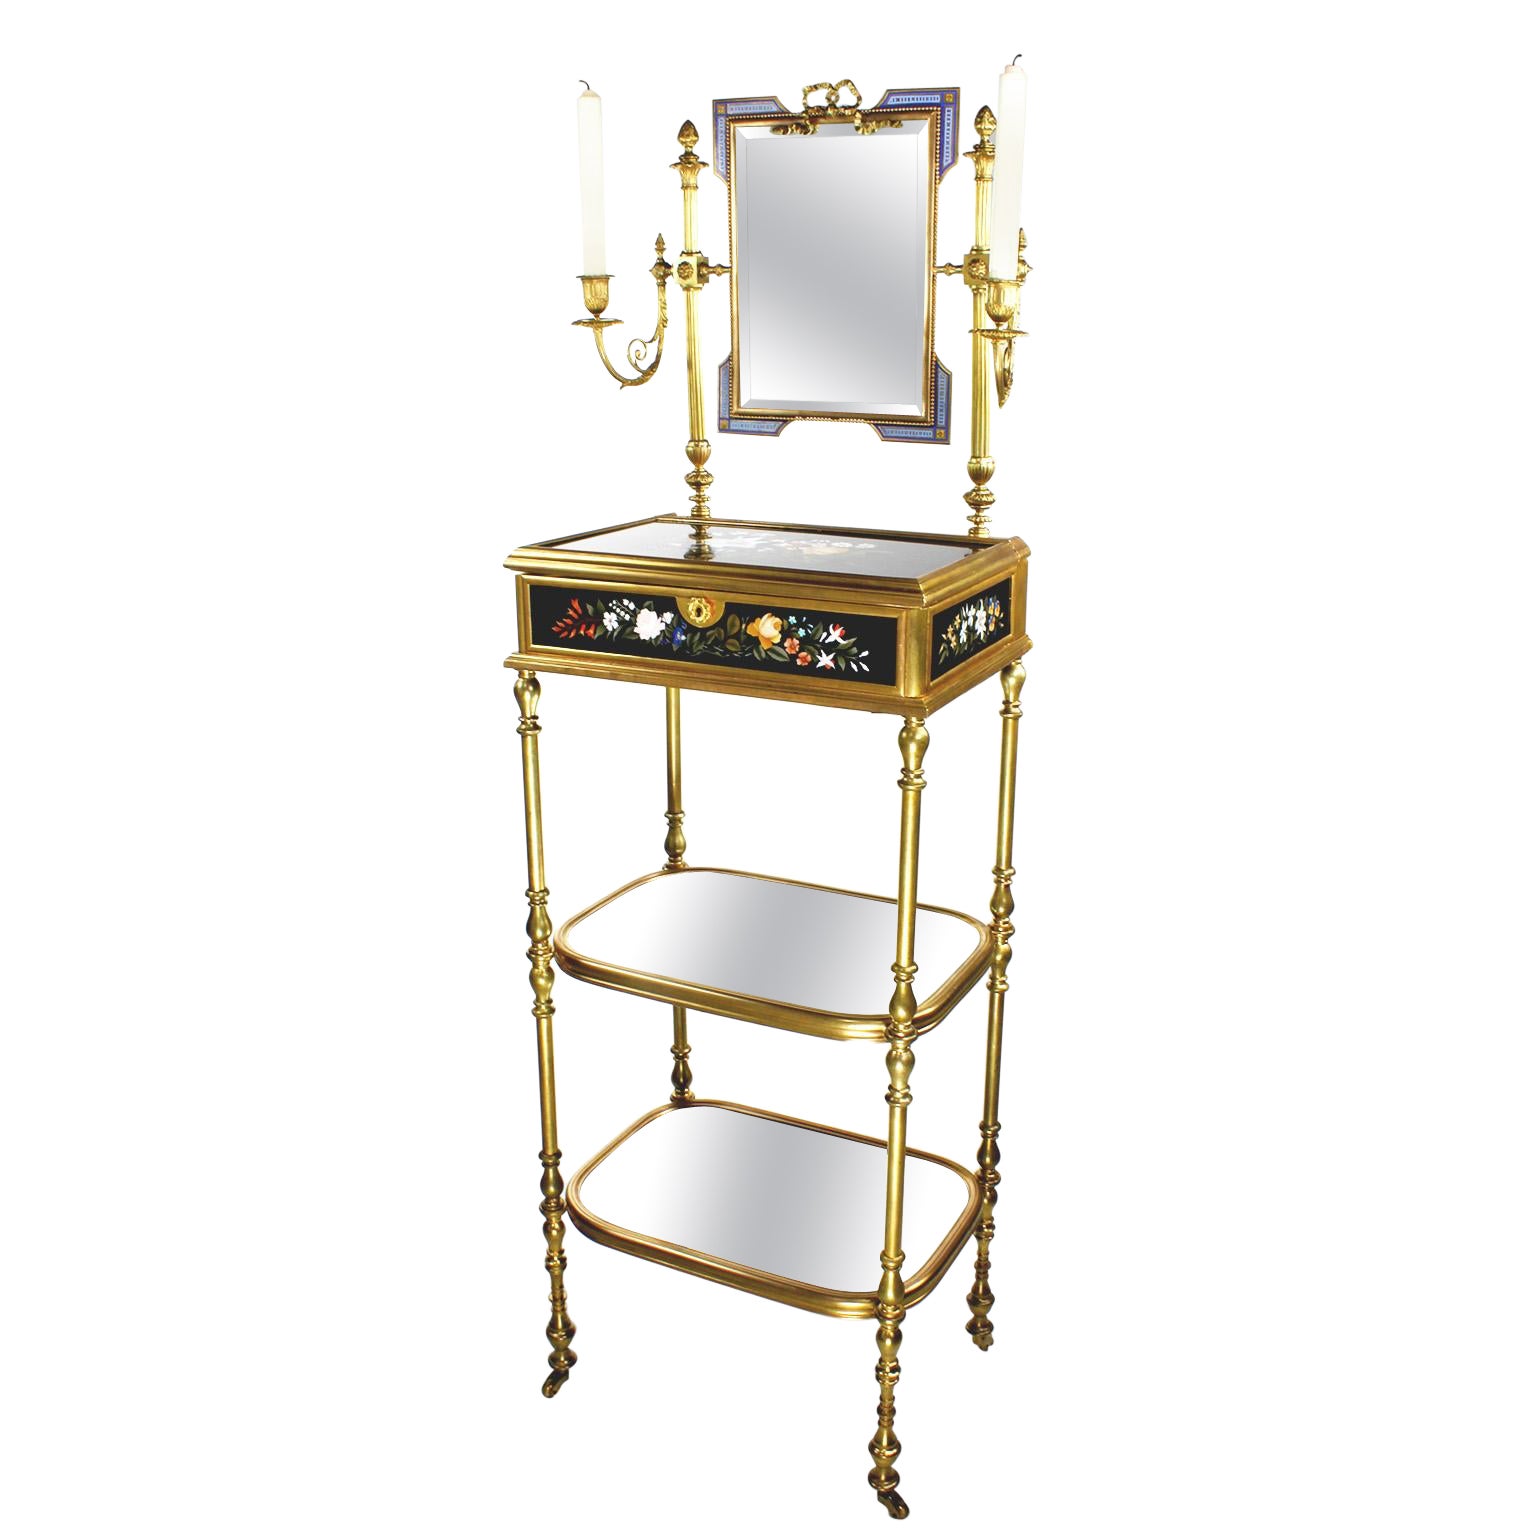 French 19th Century Gilt-Bronze and Pietra Dura Vanity Stand, Attr. Tahan, Paris For Sale